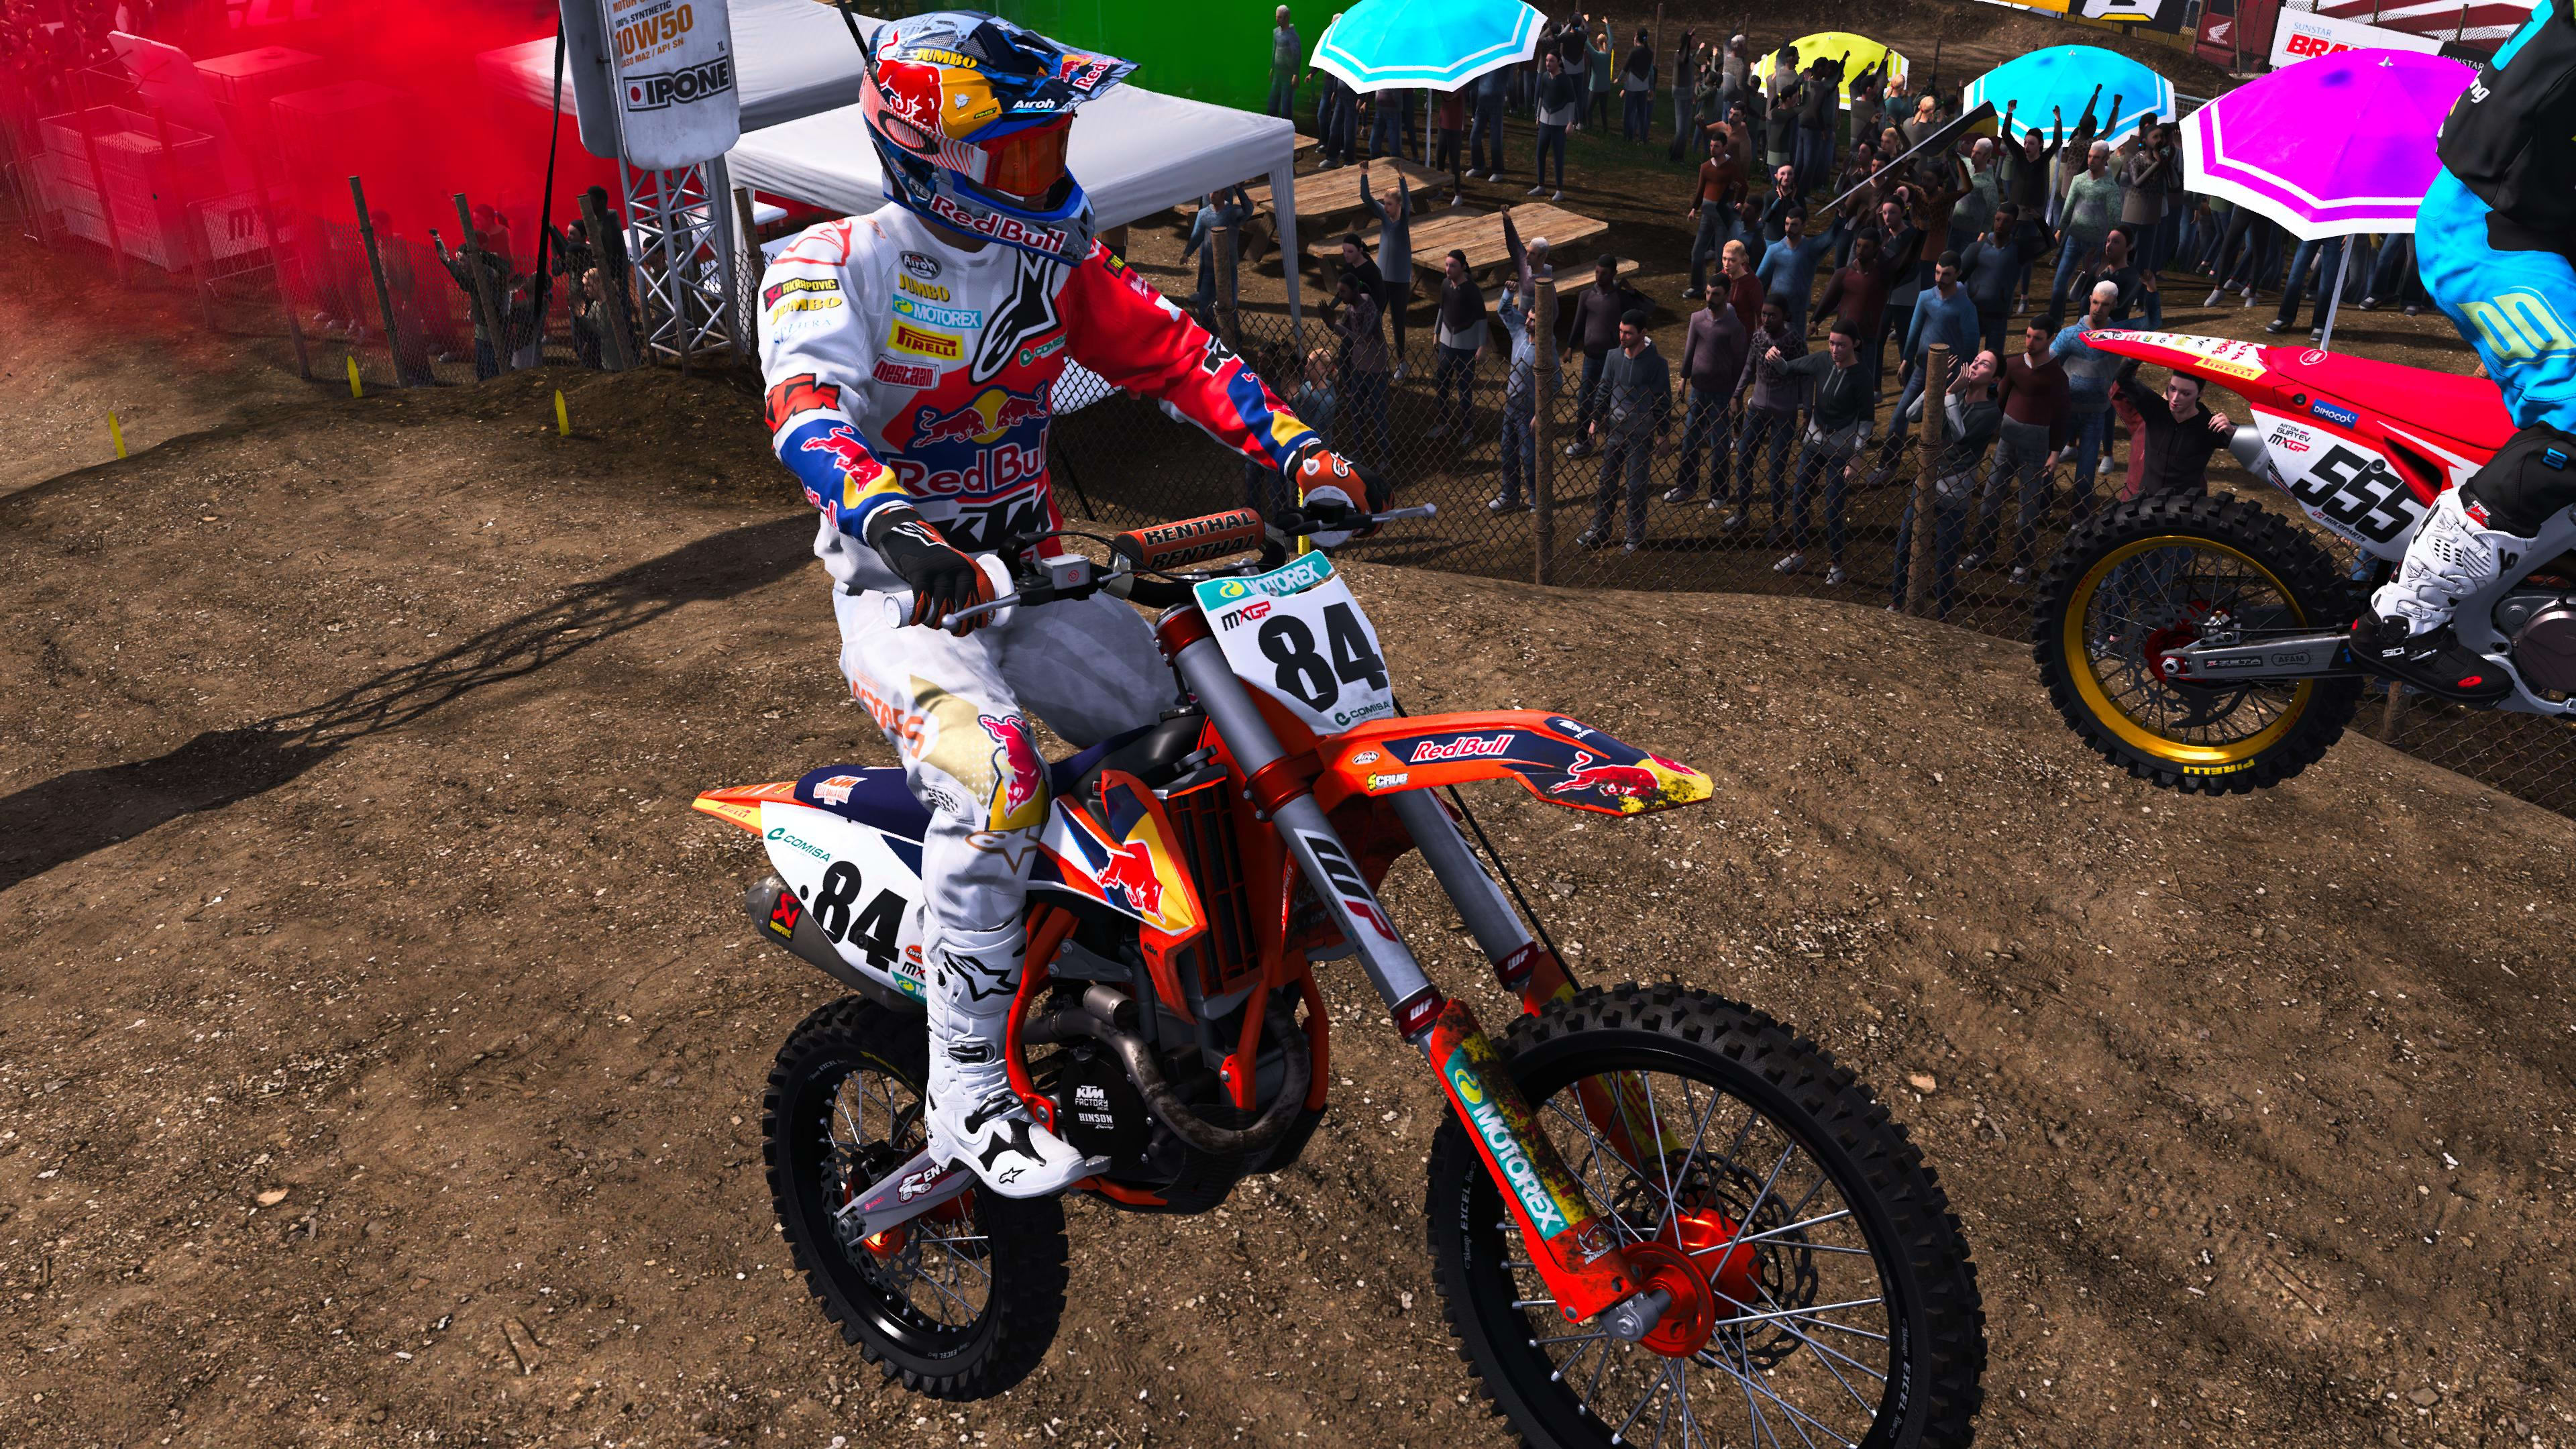 Best motocross games: The top 5 to play right now